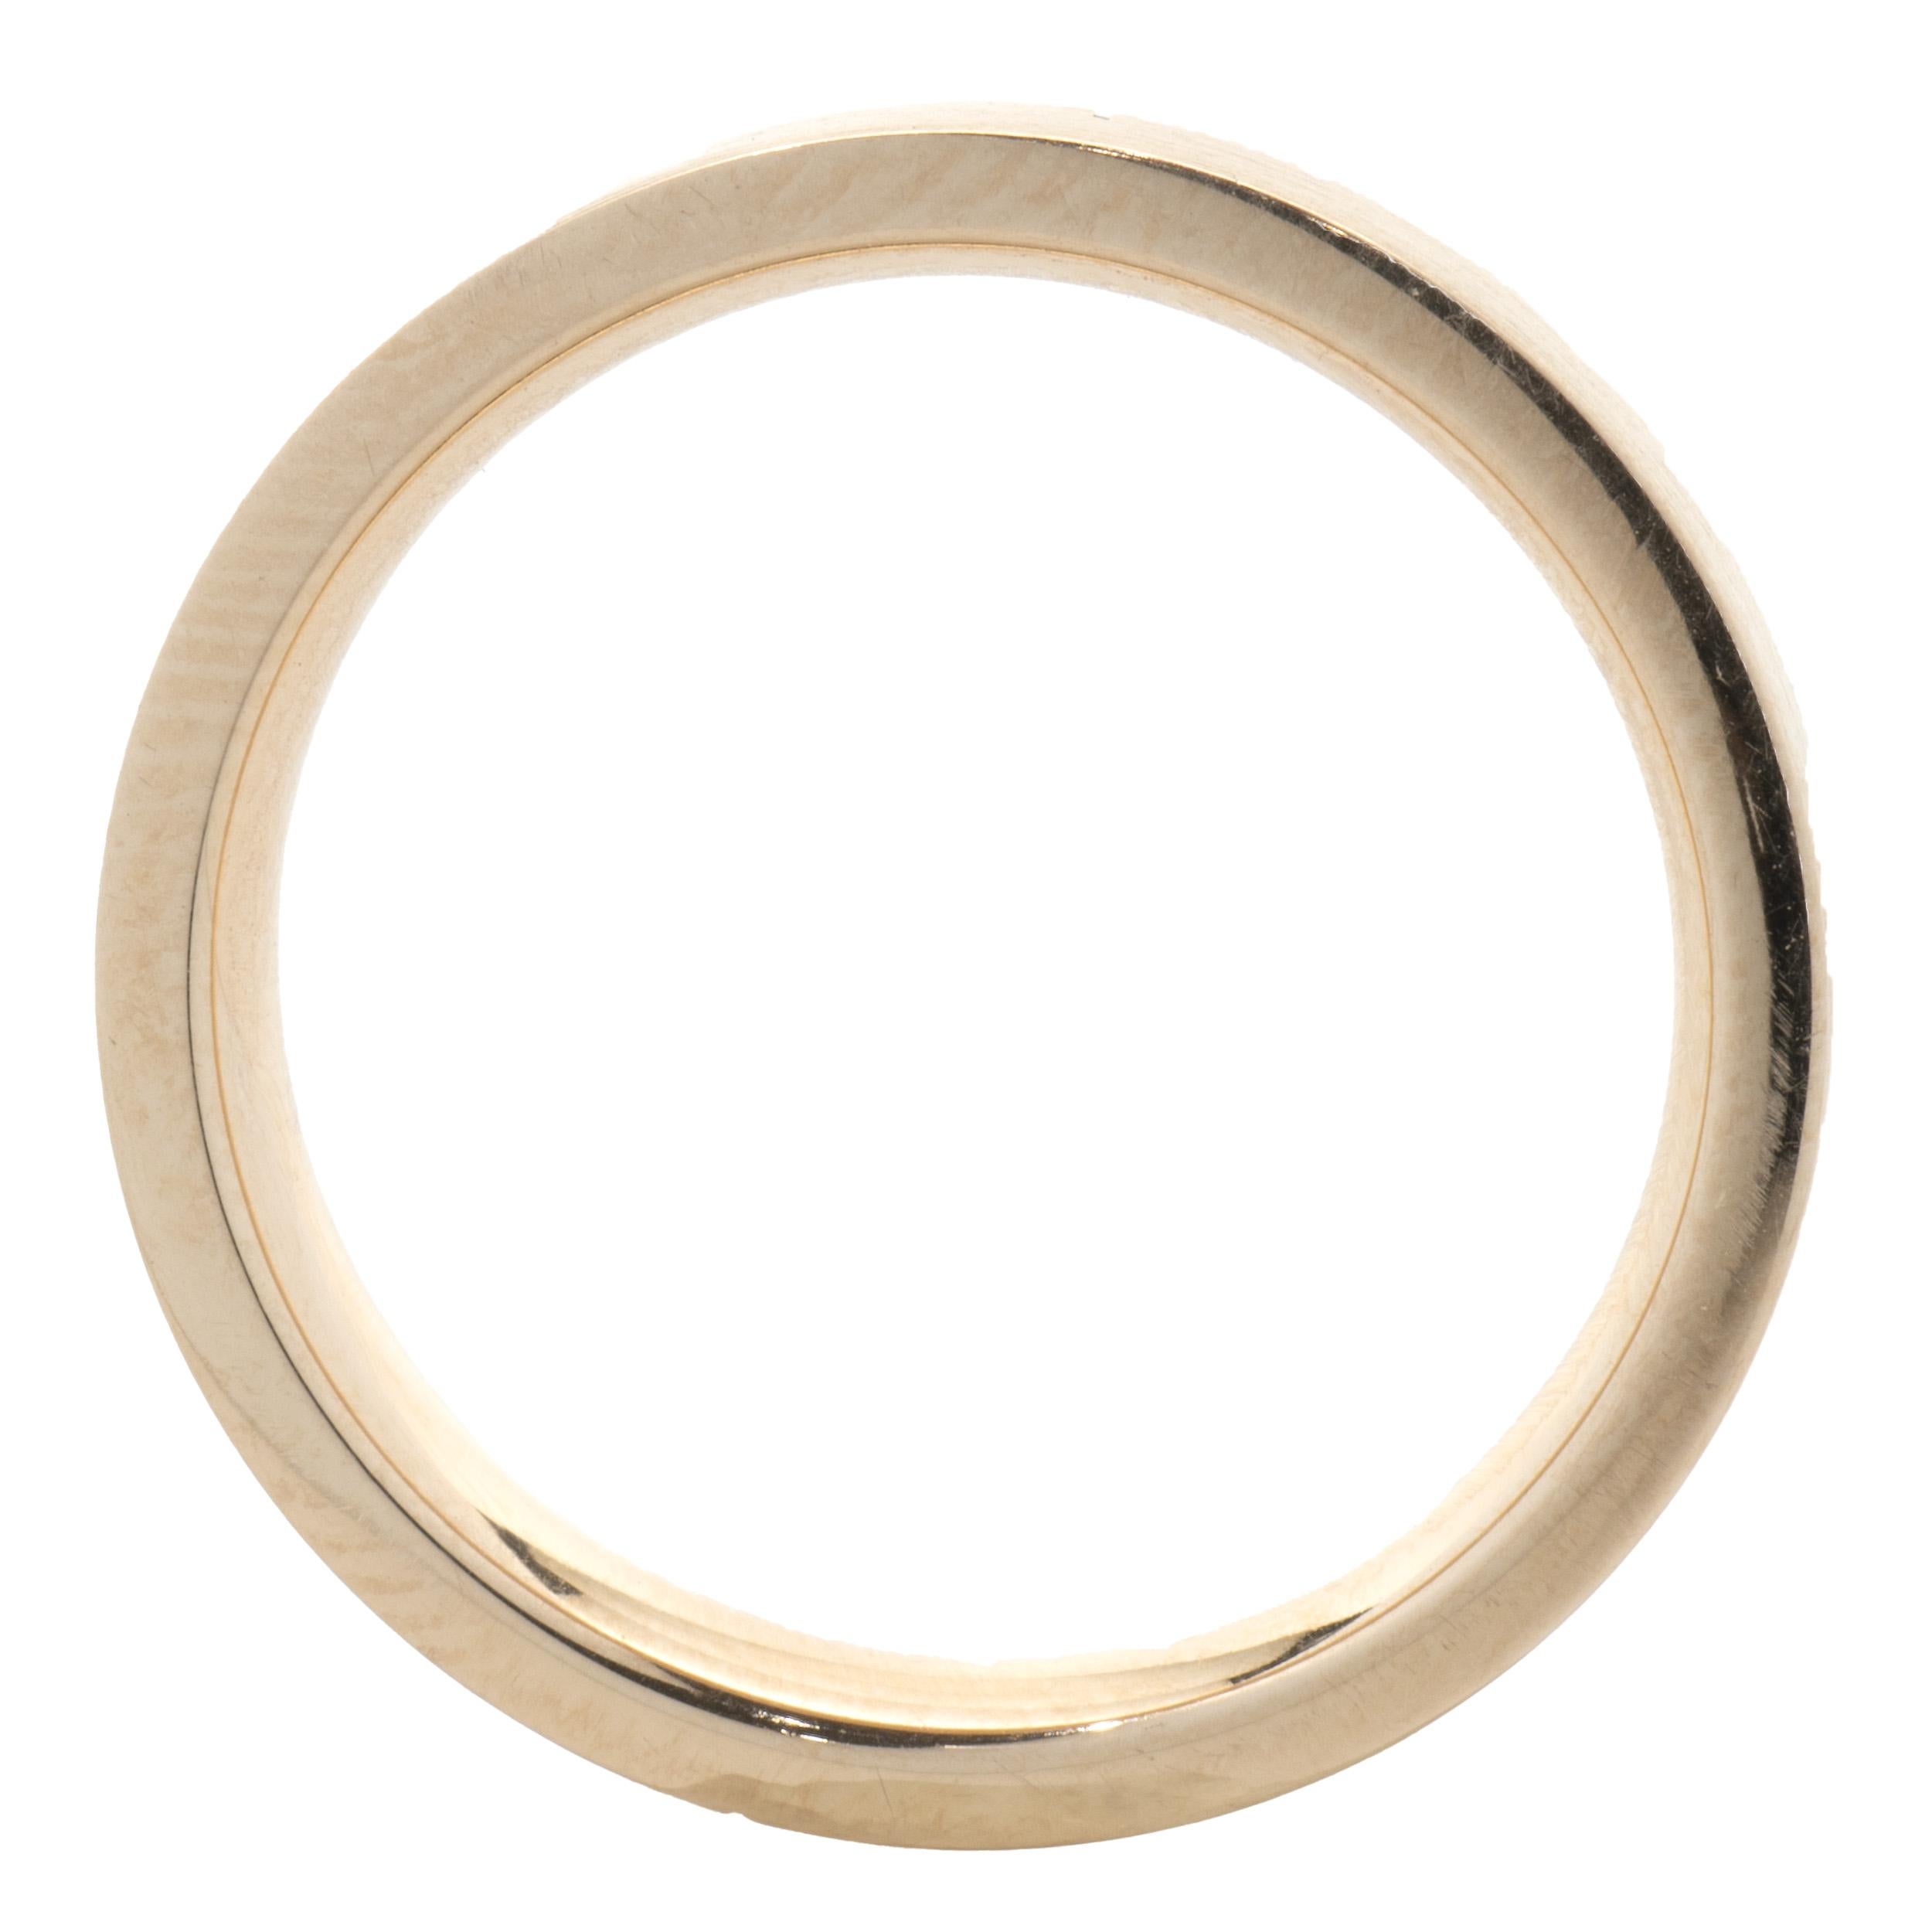 4mm wide ring